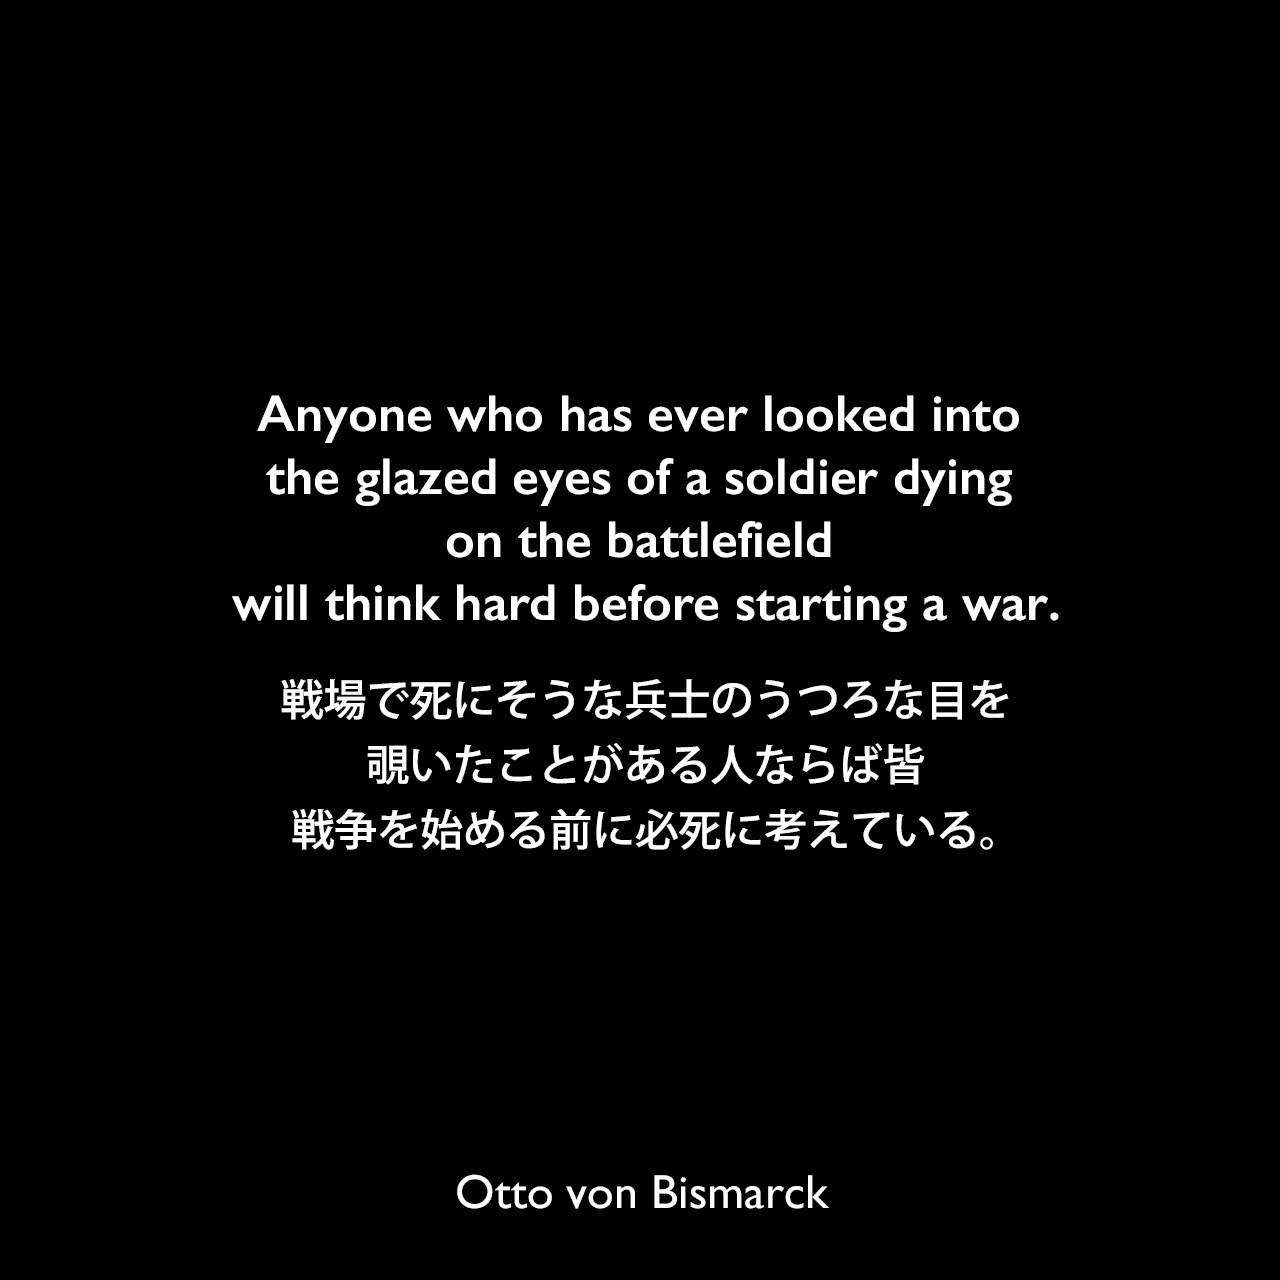 Anyone who has ever looked into the glazed eyes of a soldier dying on the battlefield will think hard before starting a war.戦場で死にそうな兵士のうつろな目を覗いたことがある人ならば皆、戦争を始める前に必死に考えている。Otto von Bismarck